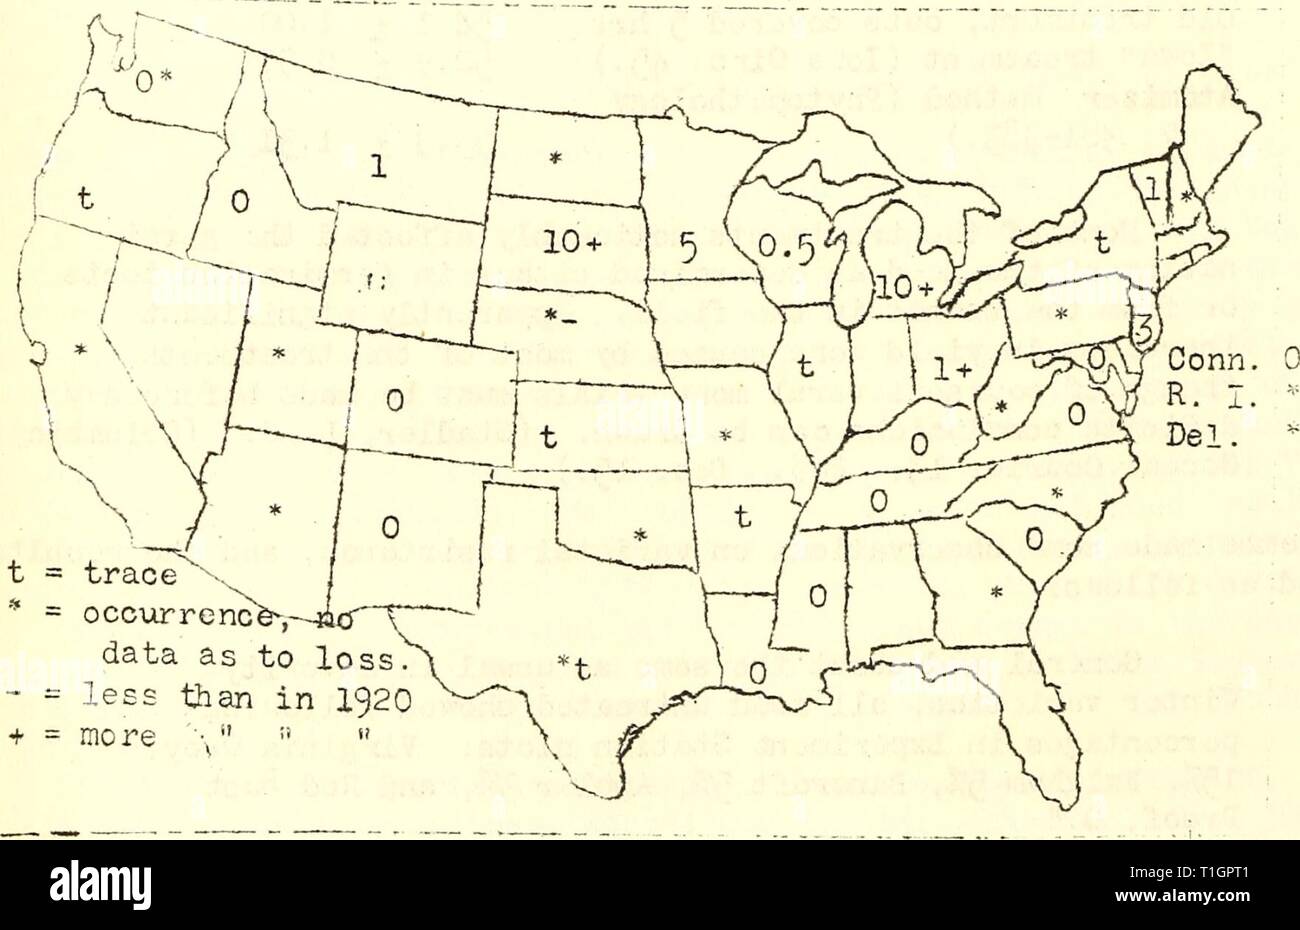 Diseases of cereal and forage Diseases of cereal and forage crops in the United States in 1921  diseasesofcereal21stak Year: 1922  2l8 OATS - Stem rust Stem rust caused by puccinia graminis Pers. Stem rust evidently was not as generally distributed as crown rust, as will be seen by the accompanying map (Fig. 'jG). Neither did the stem rust cause such great reductions in yield. However, it was quite generally present in the more northern oat-?:,romug states. In the extreme South the stem rust seems to be much less important than the crown rust, while in the northern states, stem rust did the gr Stock Photo